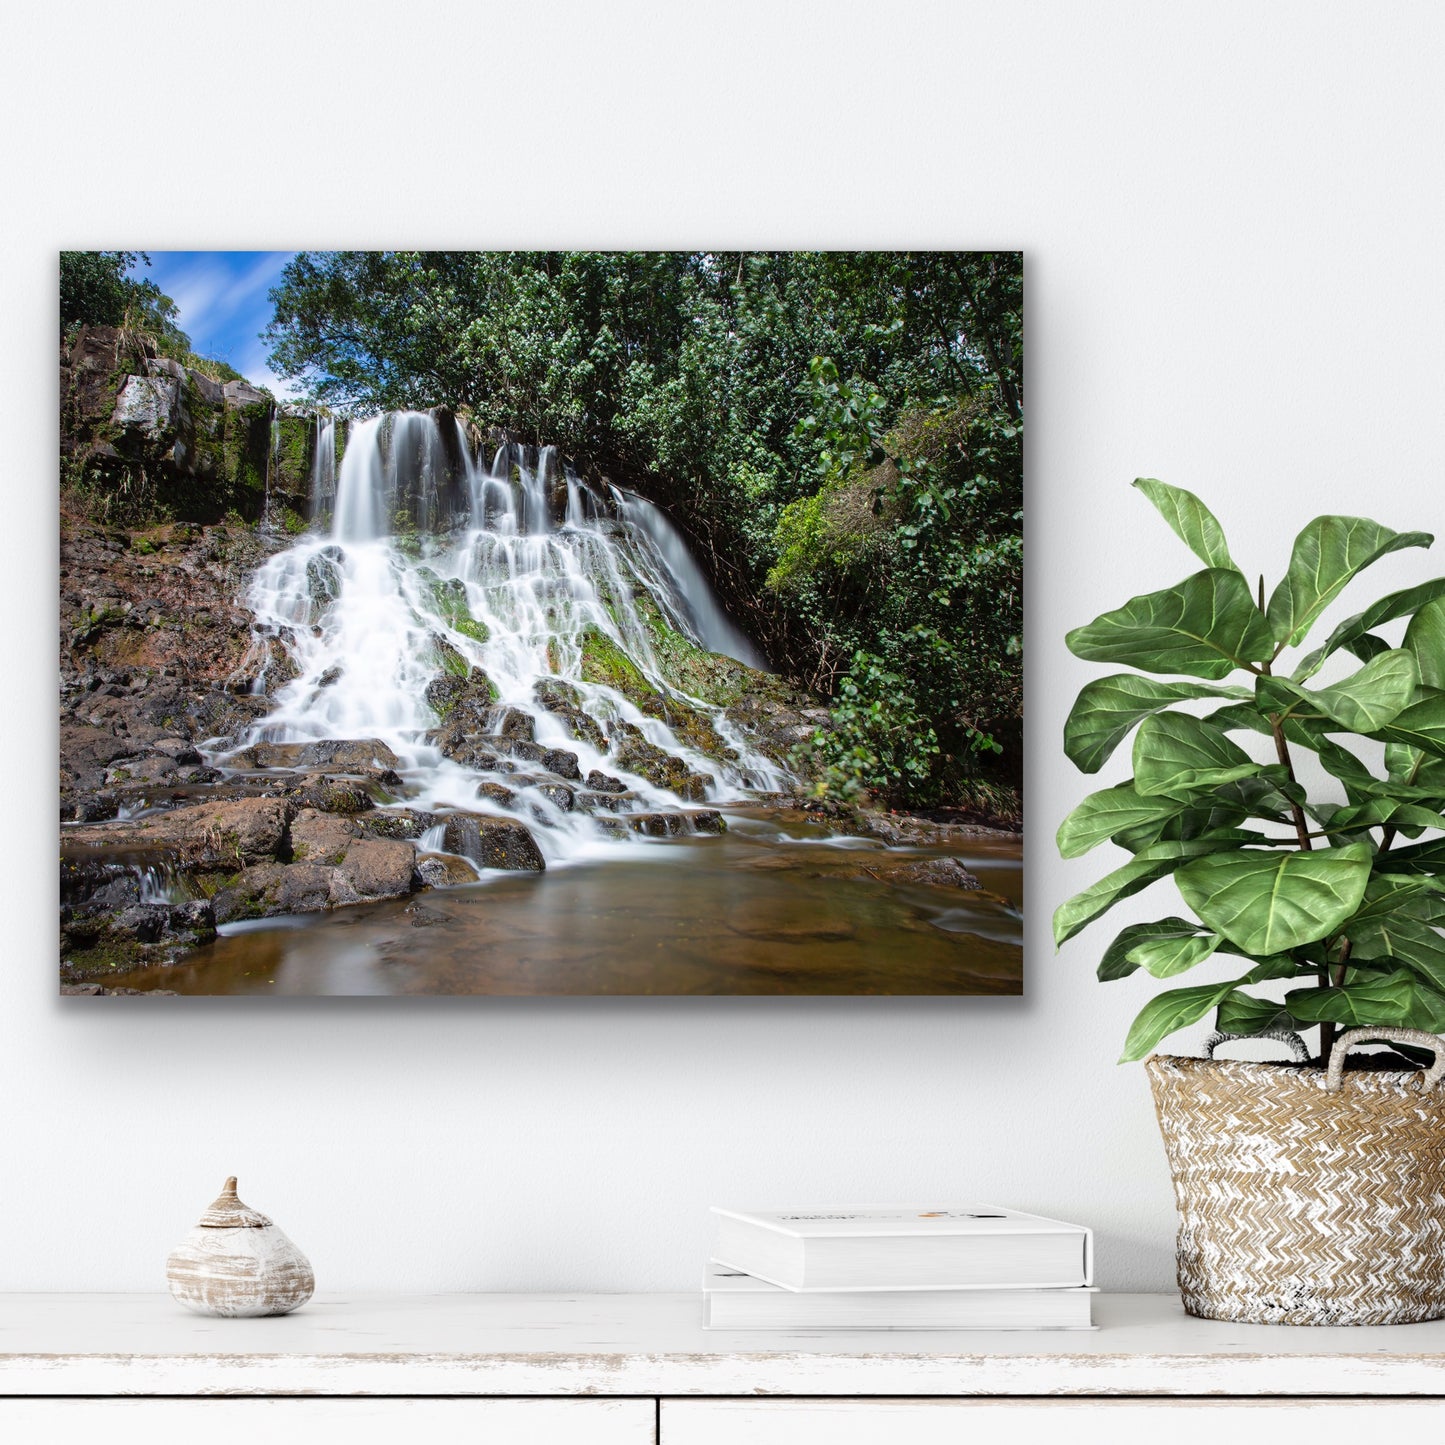 Wall demo of Hoopii Falls, a fine art landscape photograph by Inspiring Images Hawaii.